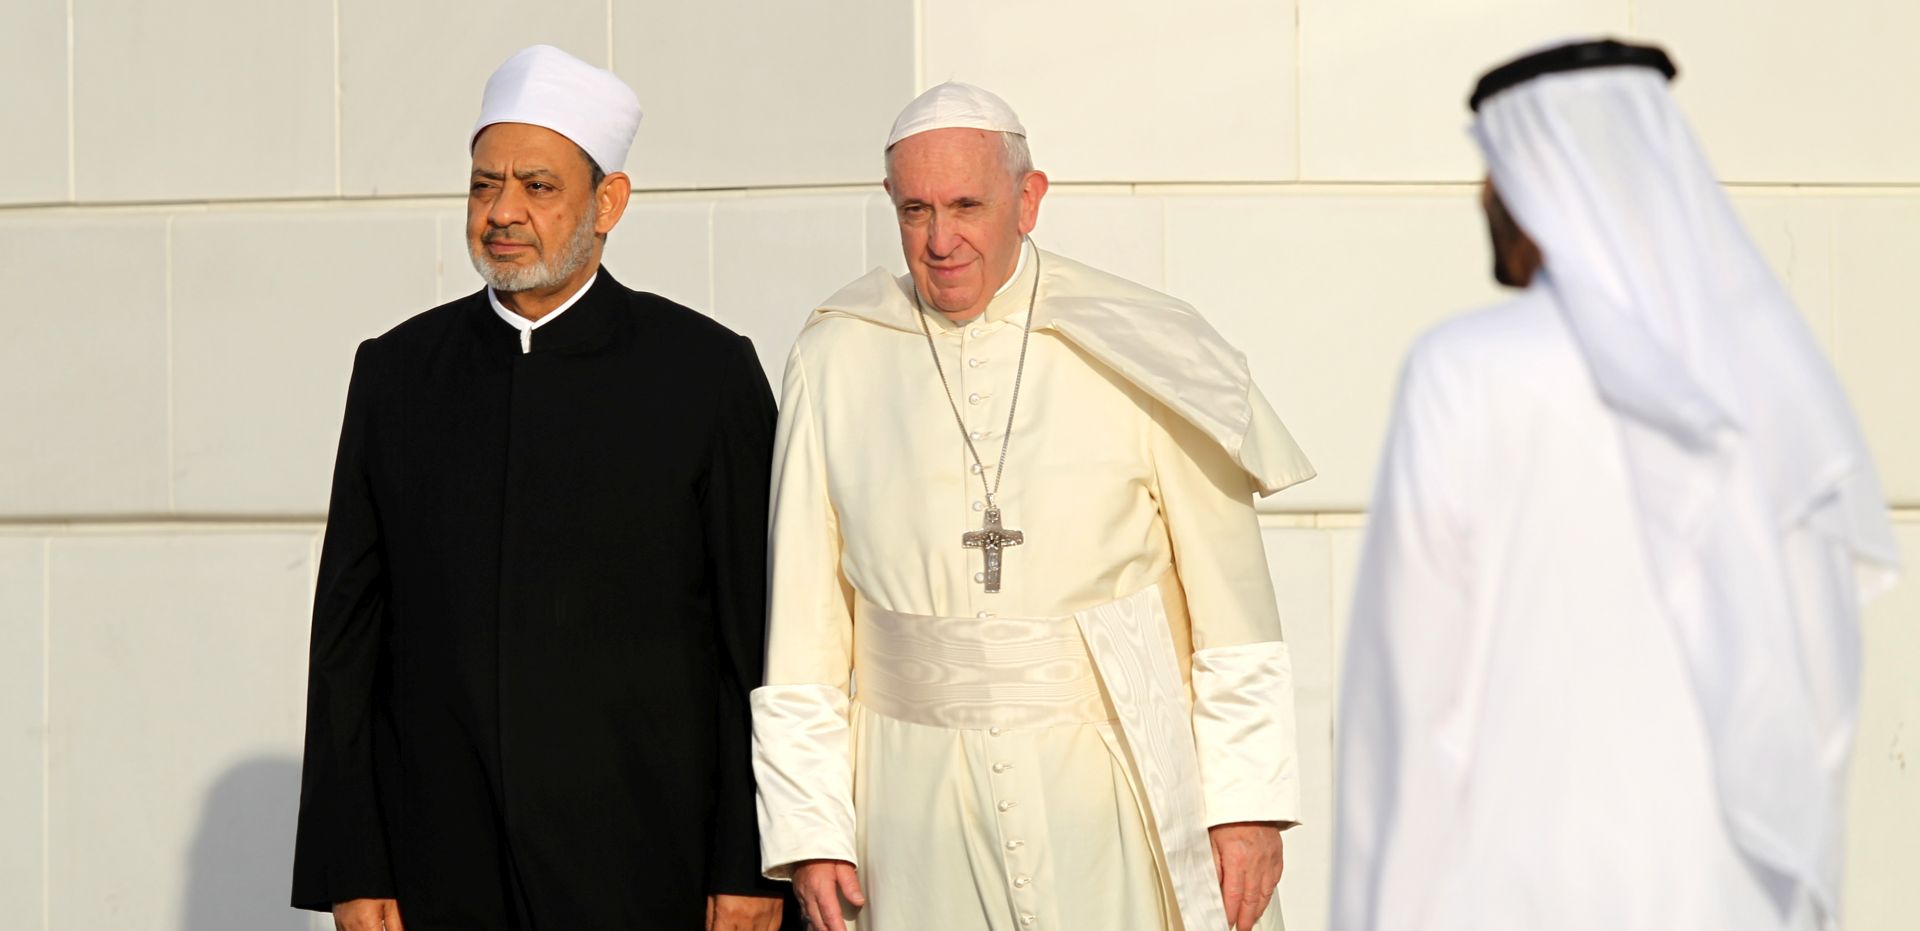 epa07342815 His Holiness Pope Francis (R) head of Catholic Church and His Eminence Ahmed el-Tayeb Grand Imam of Al Azhar Al Sharif visit Sheikh Zayed Mosque in the Gulf emirate of Abu Dhabi, United Arab Emirates, 04 February 2019. Pope Francis is on three-day visit to the UAE, making him the first pontiff to visit an Arab Gulf state.  EPA/ALI HAIDER